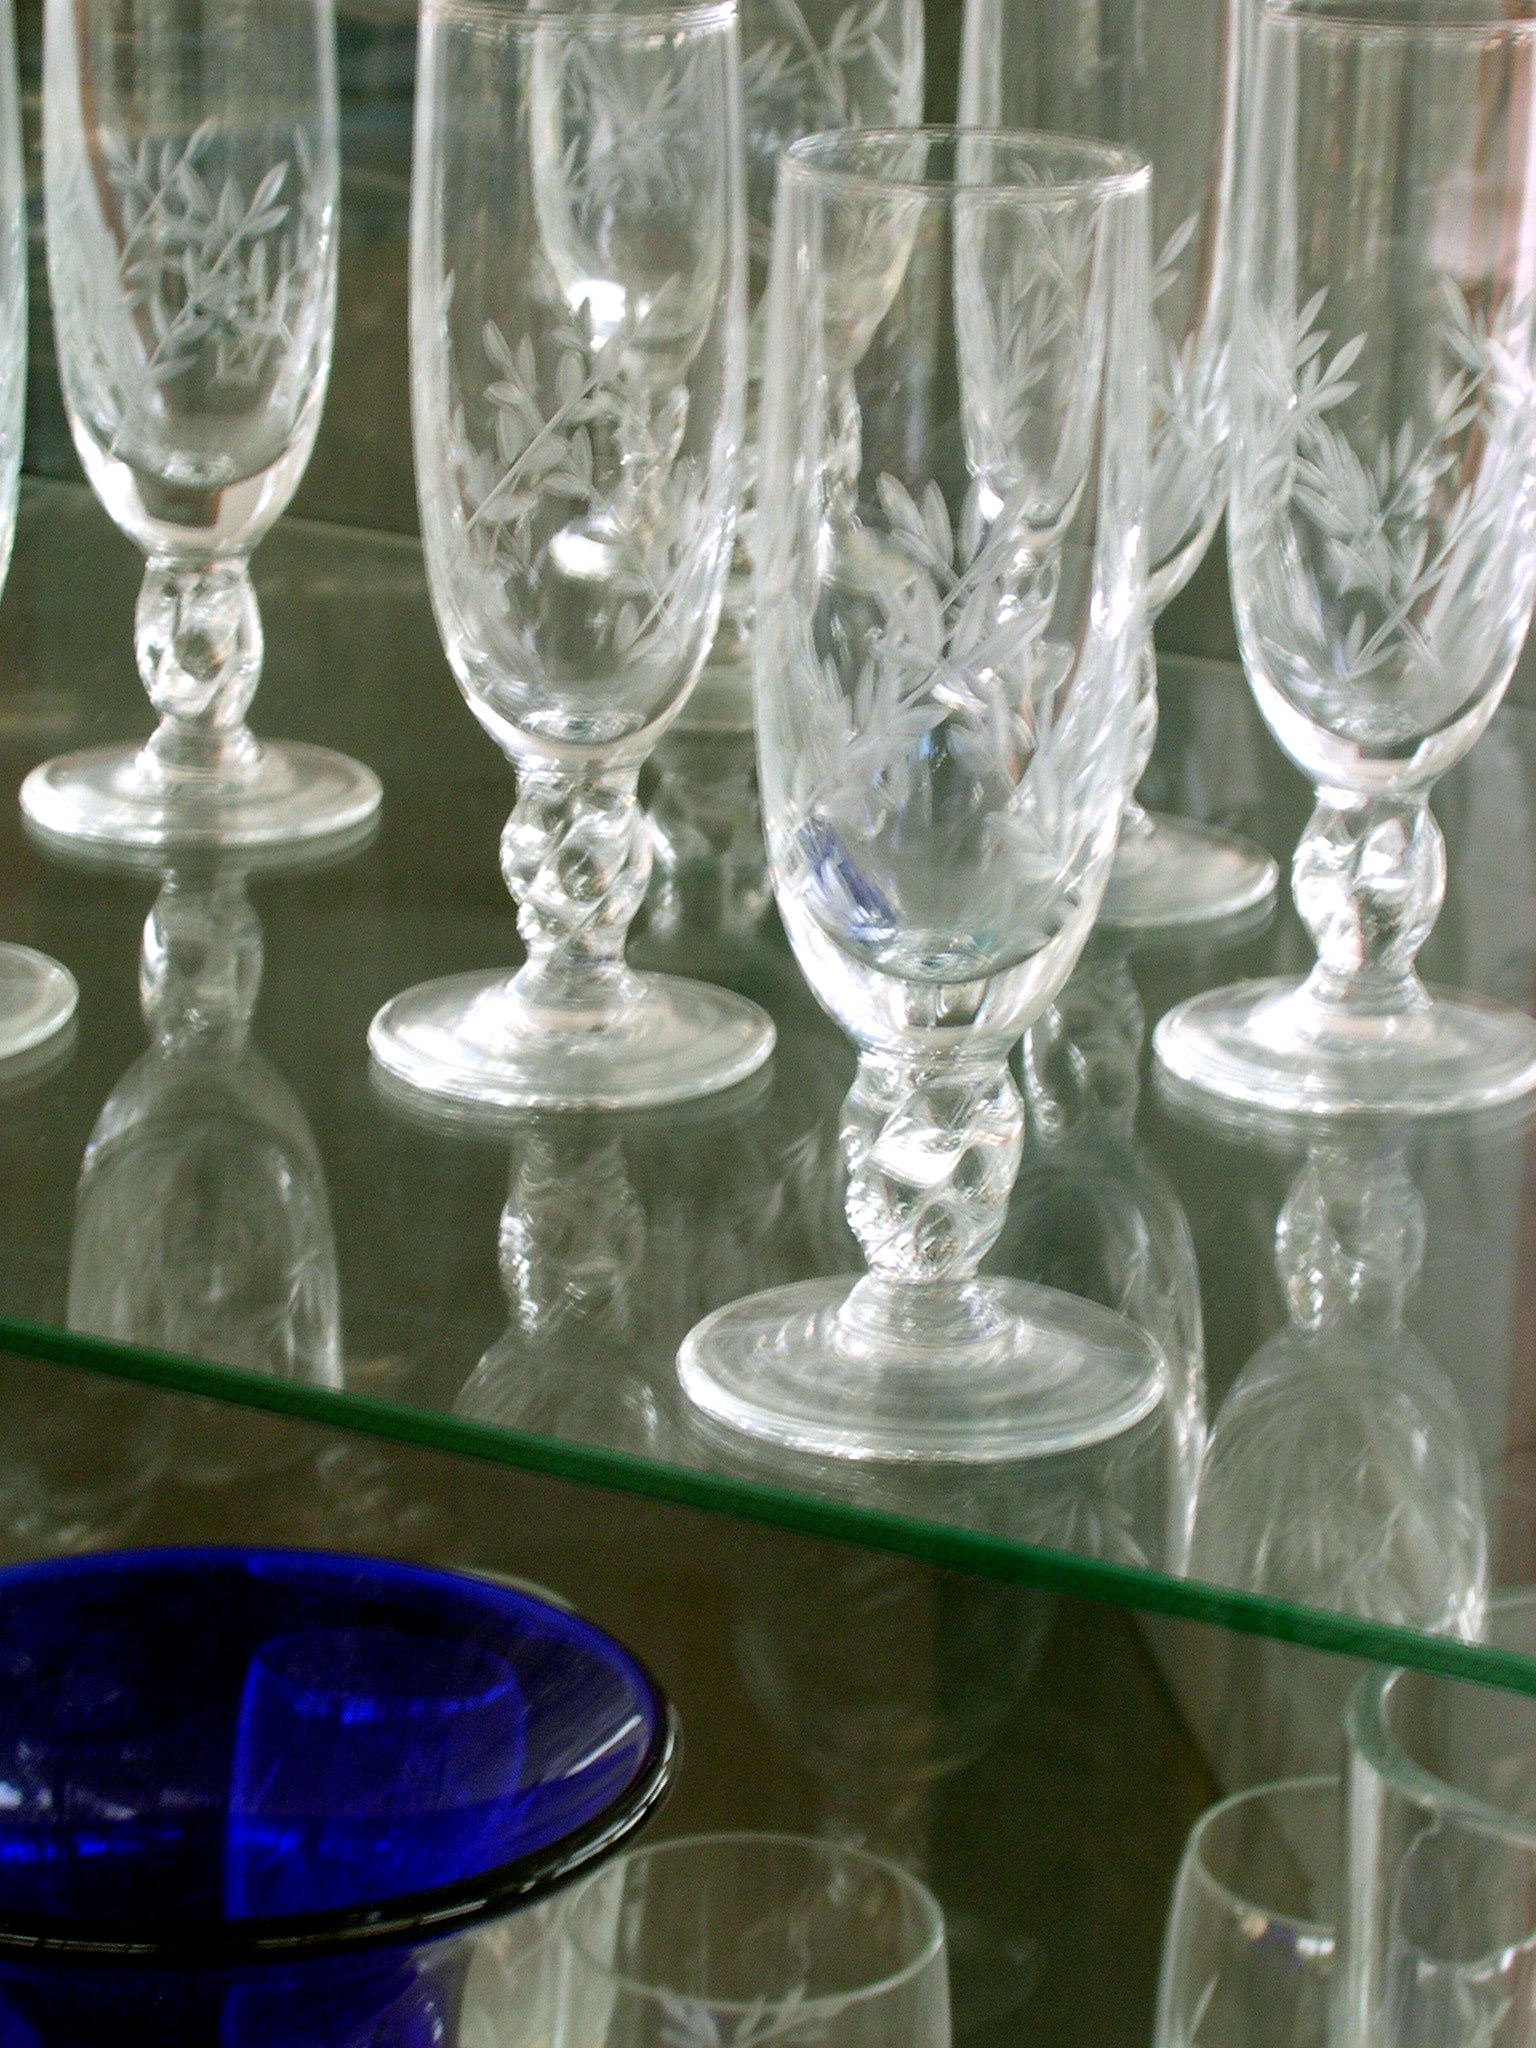 several empty glasses sit against a glass counter